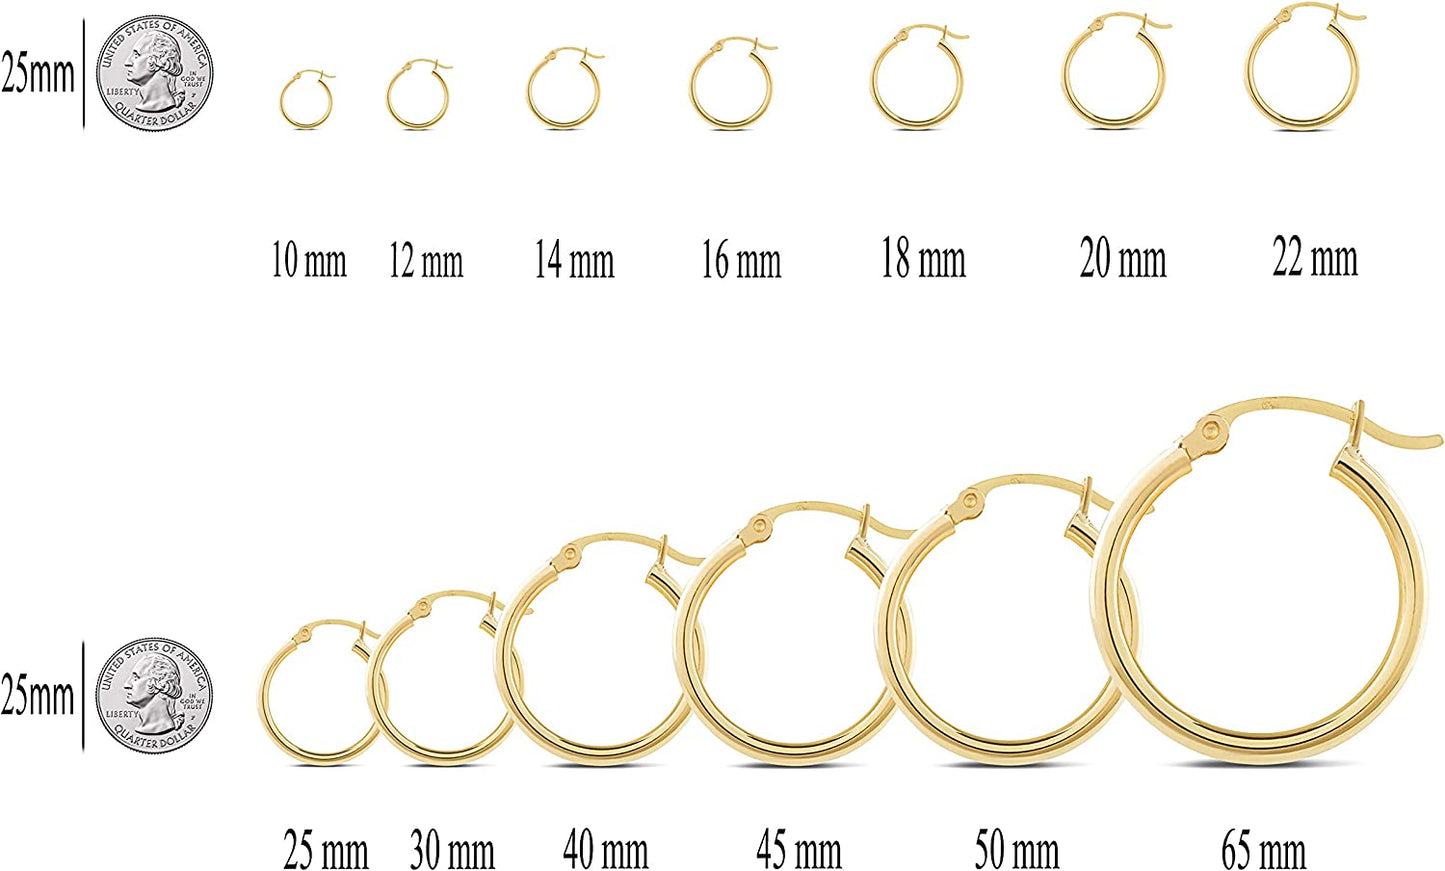 14K Yellow Gold Classic Shiny Polished Round Hoop Womens Earrings, 2mm - 3mm tube, 10mm - 65mm Diameter